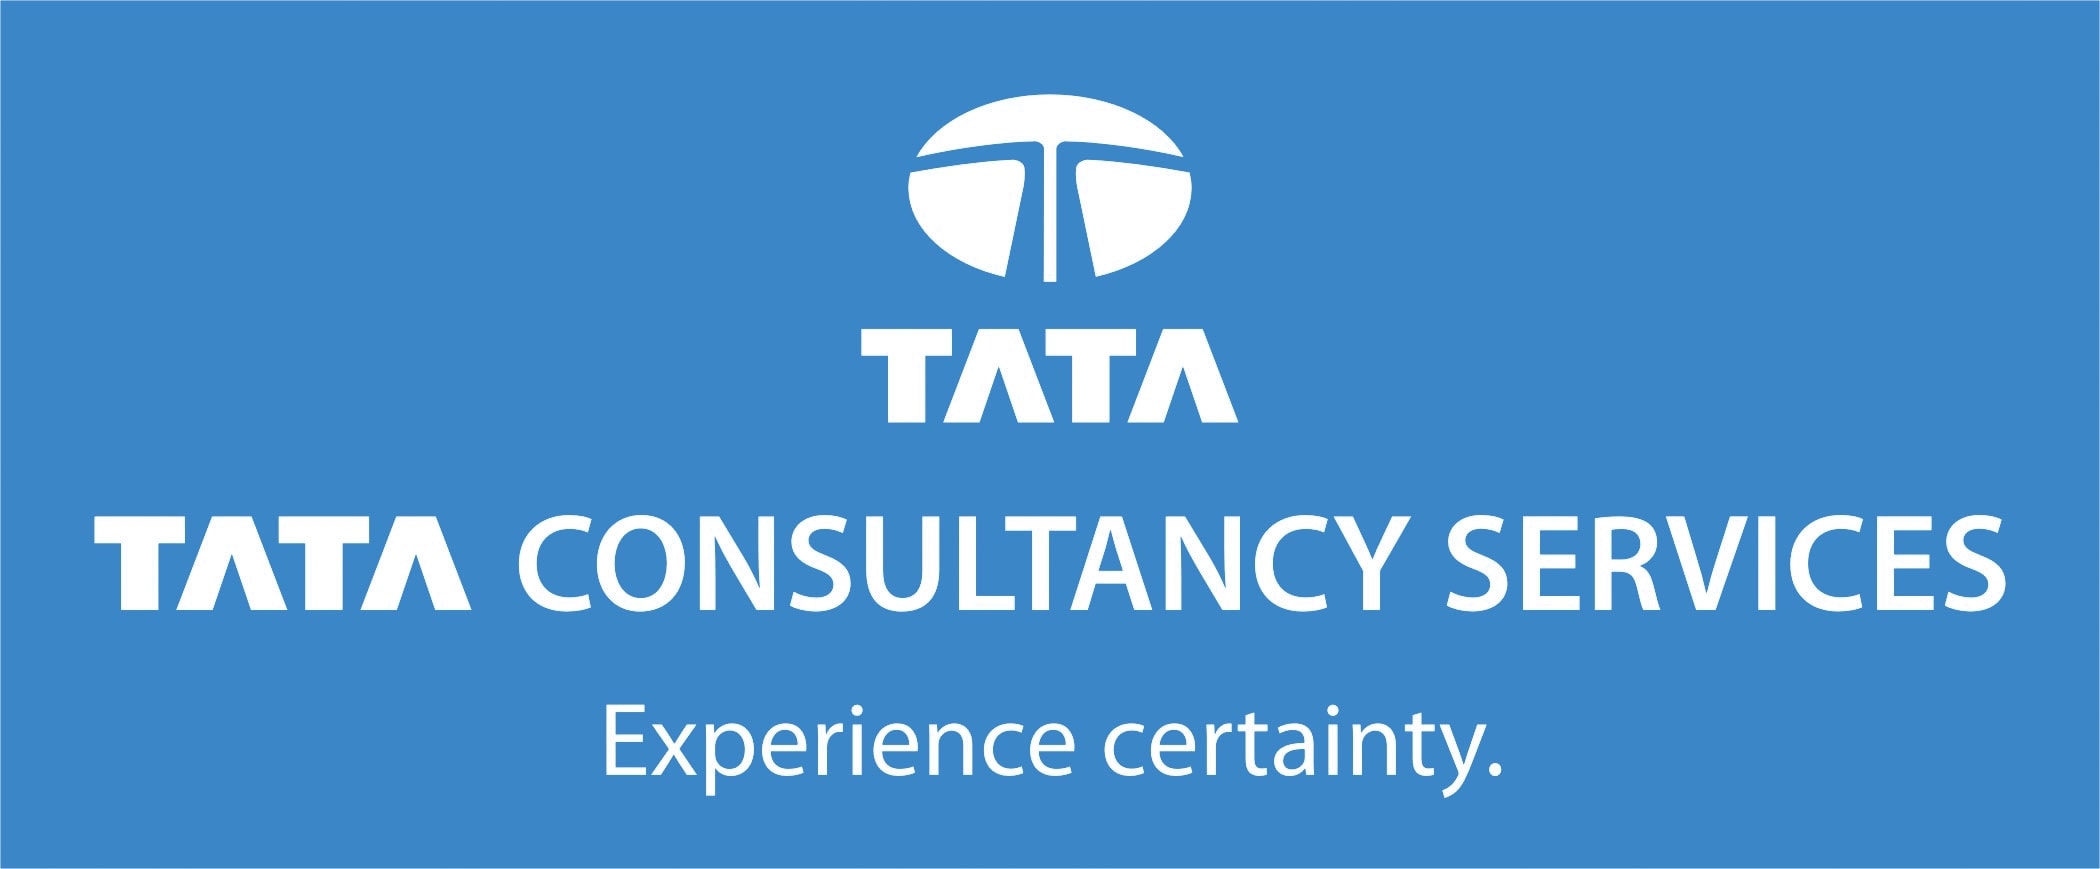 Tata Consulting Services or TCS is Top IT Companies